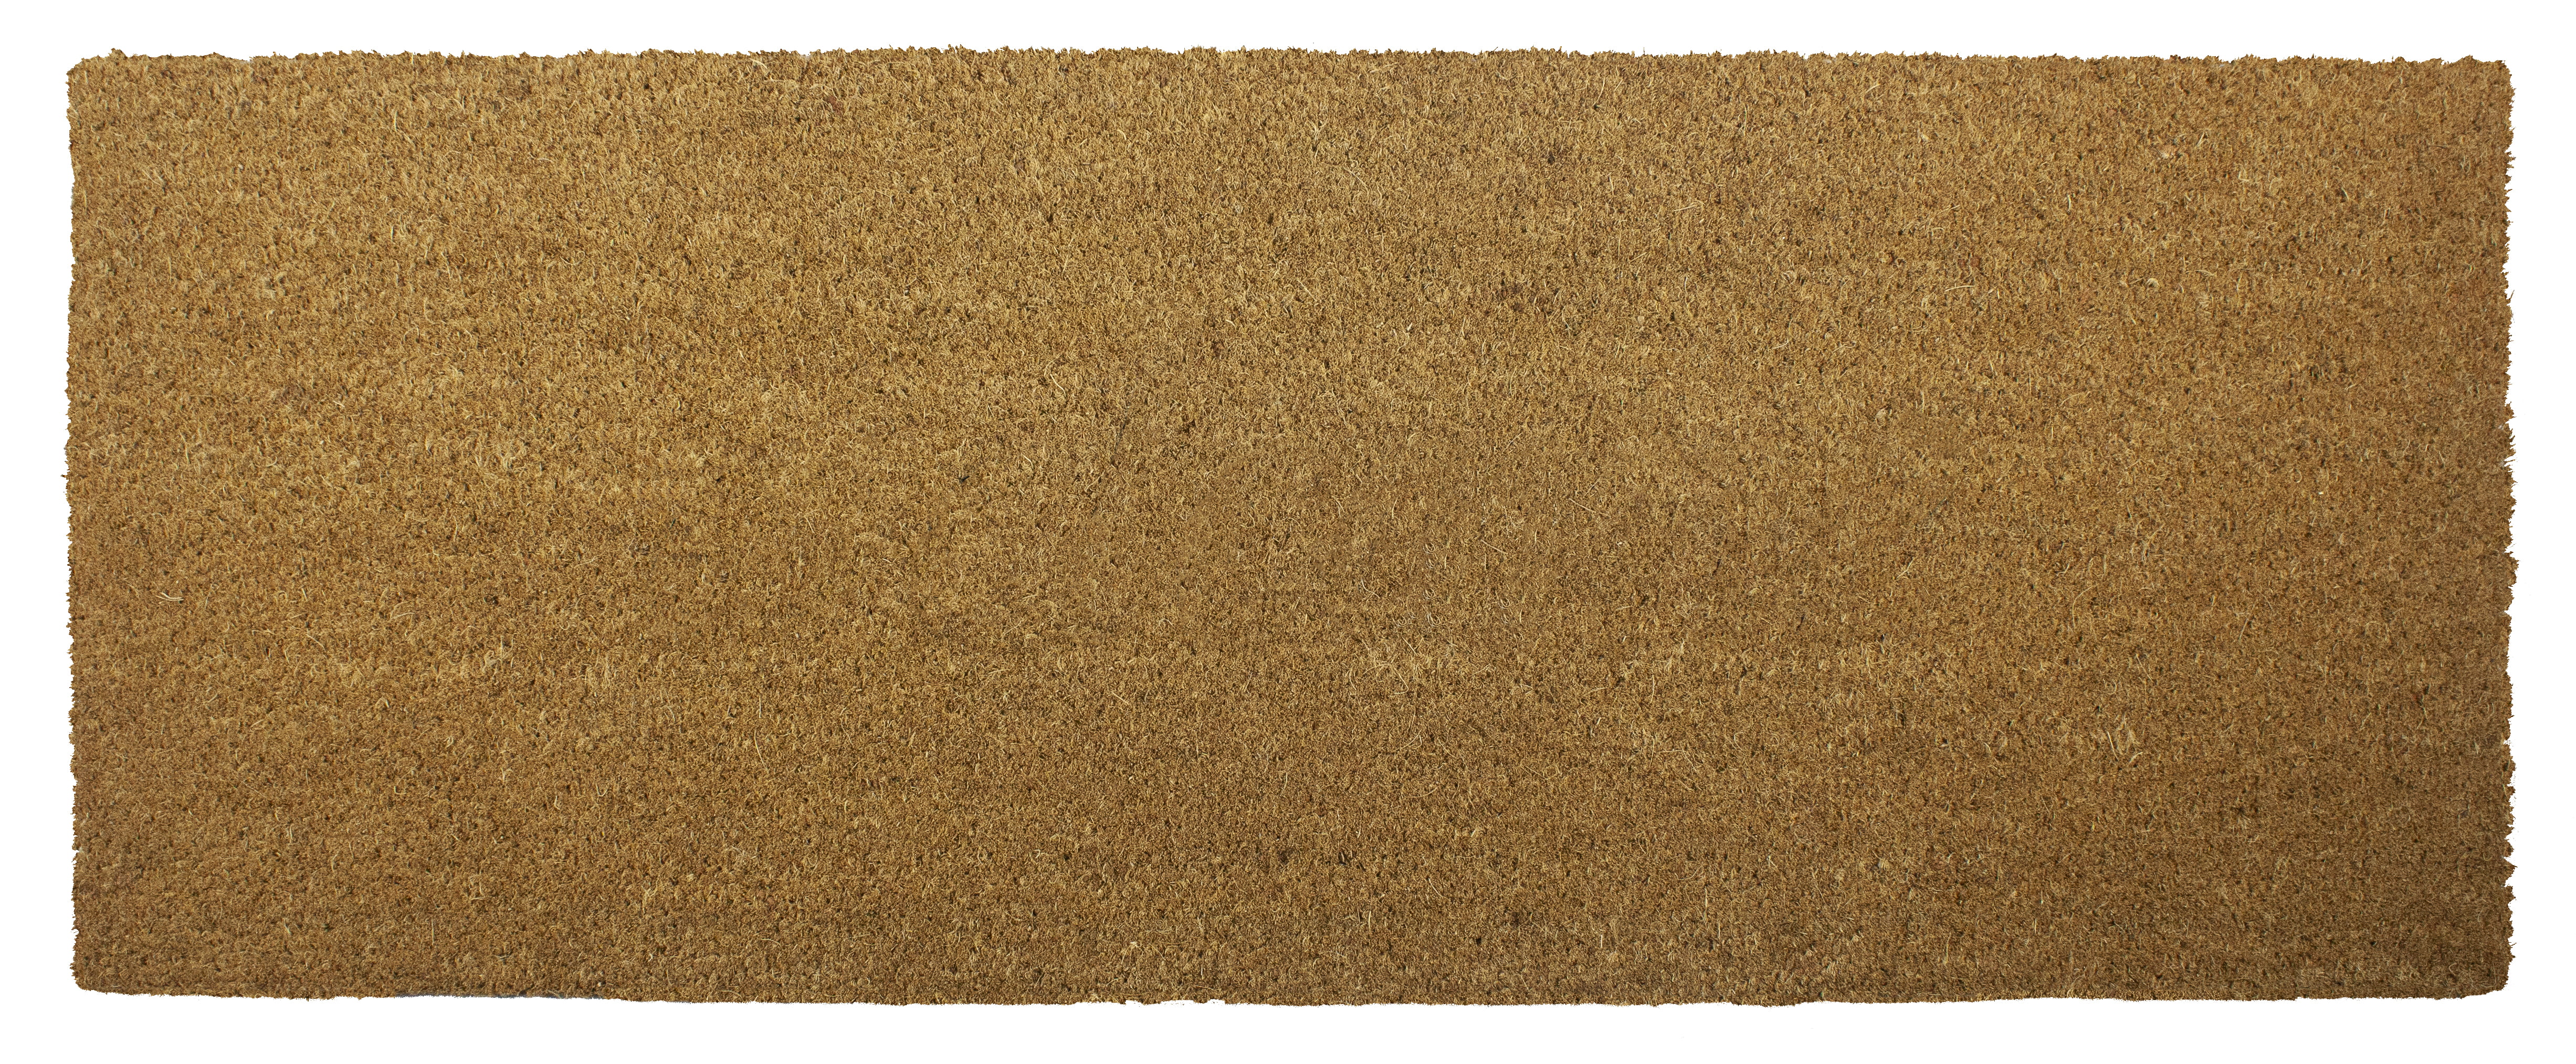 Liora Manne NTR12222412 Natura Summer Coastal Please Remove Your Shoes Natural Outdoor Welcome Coir Door Mat 16 x 26